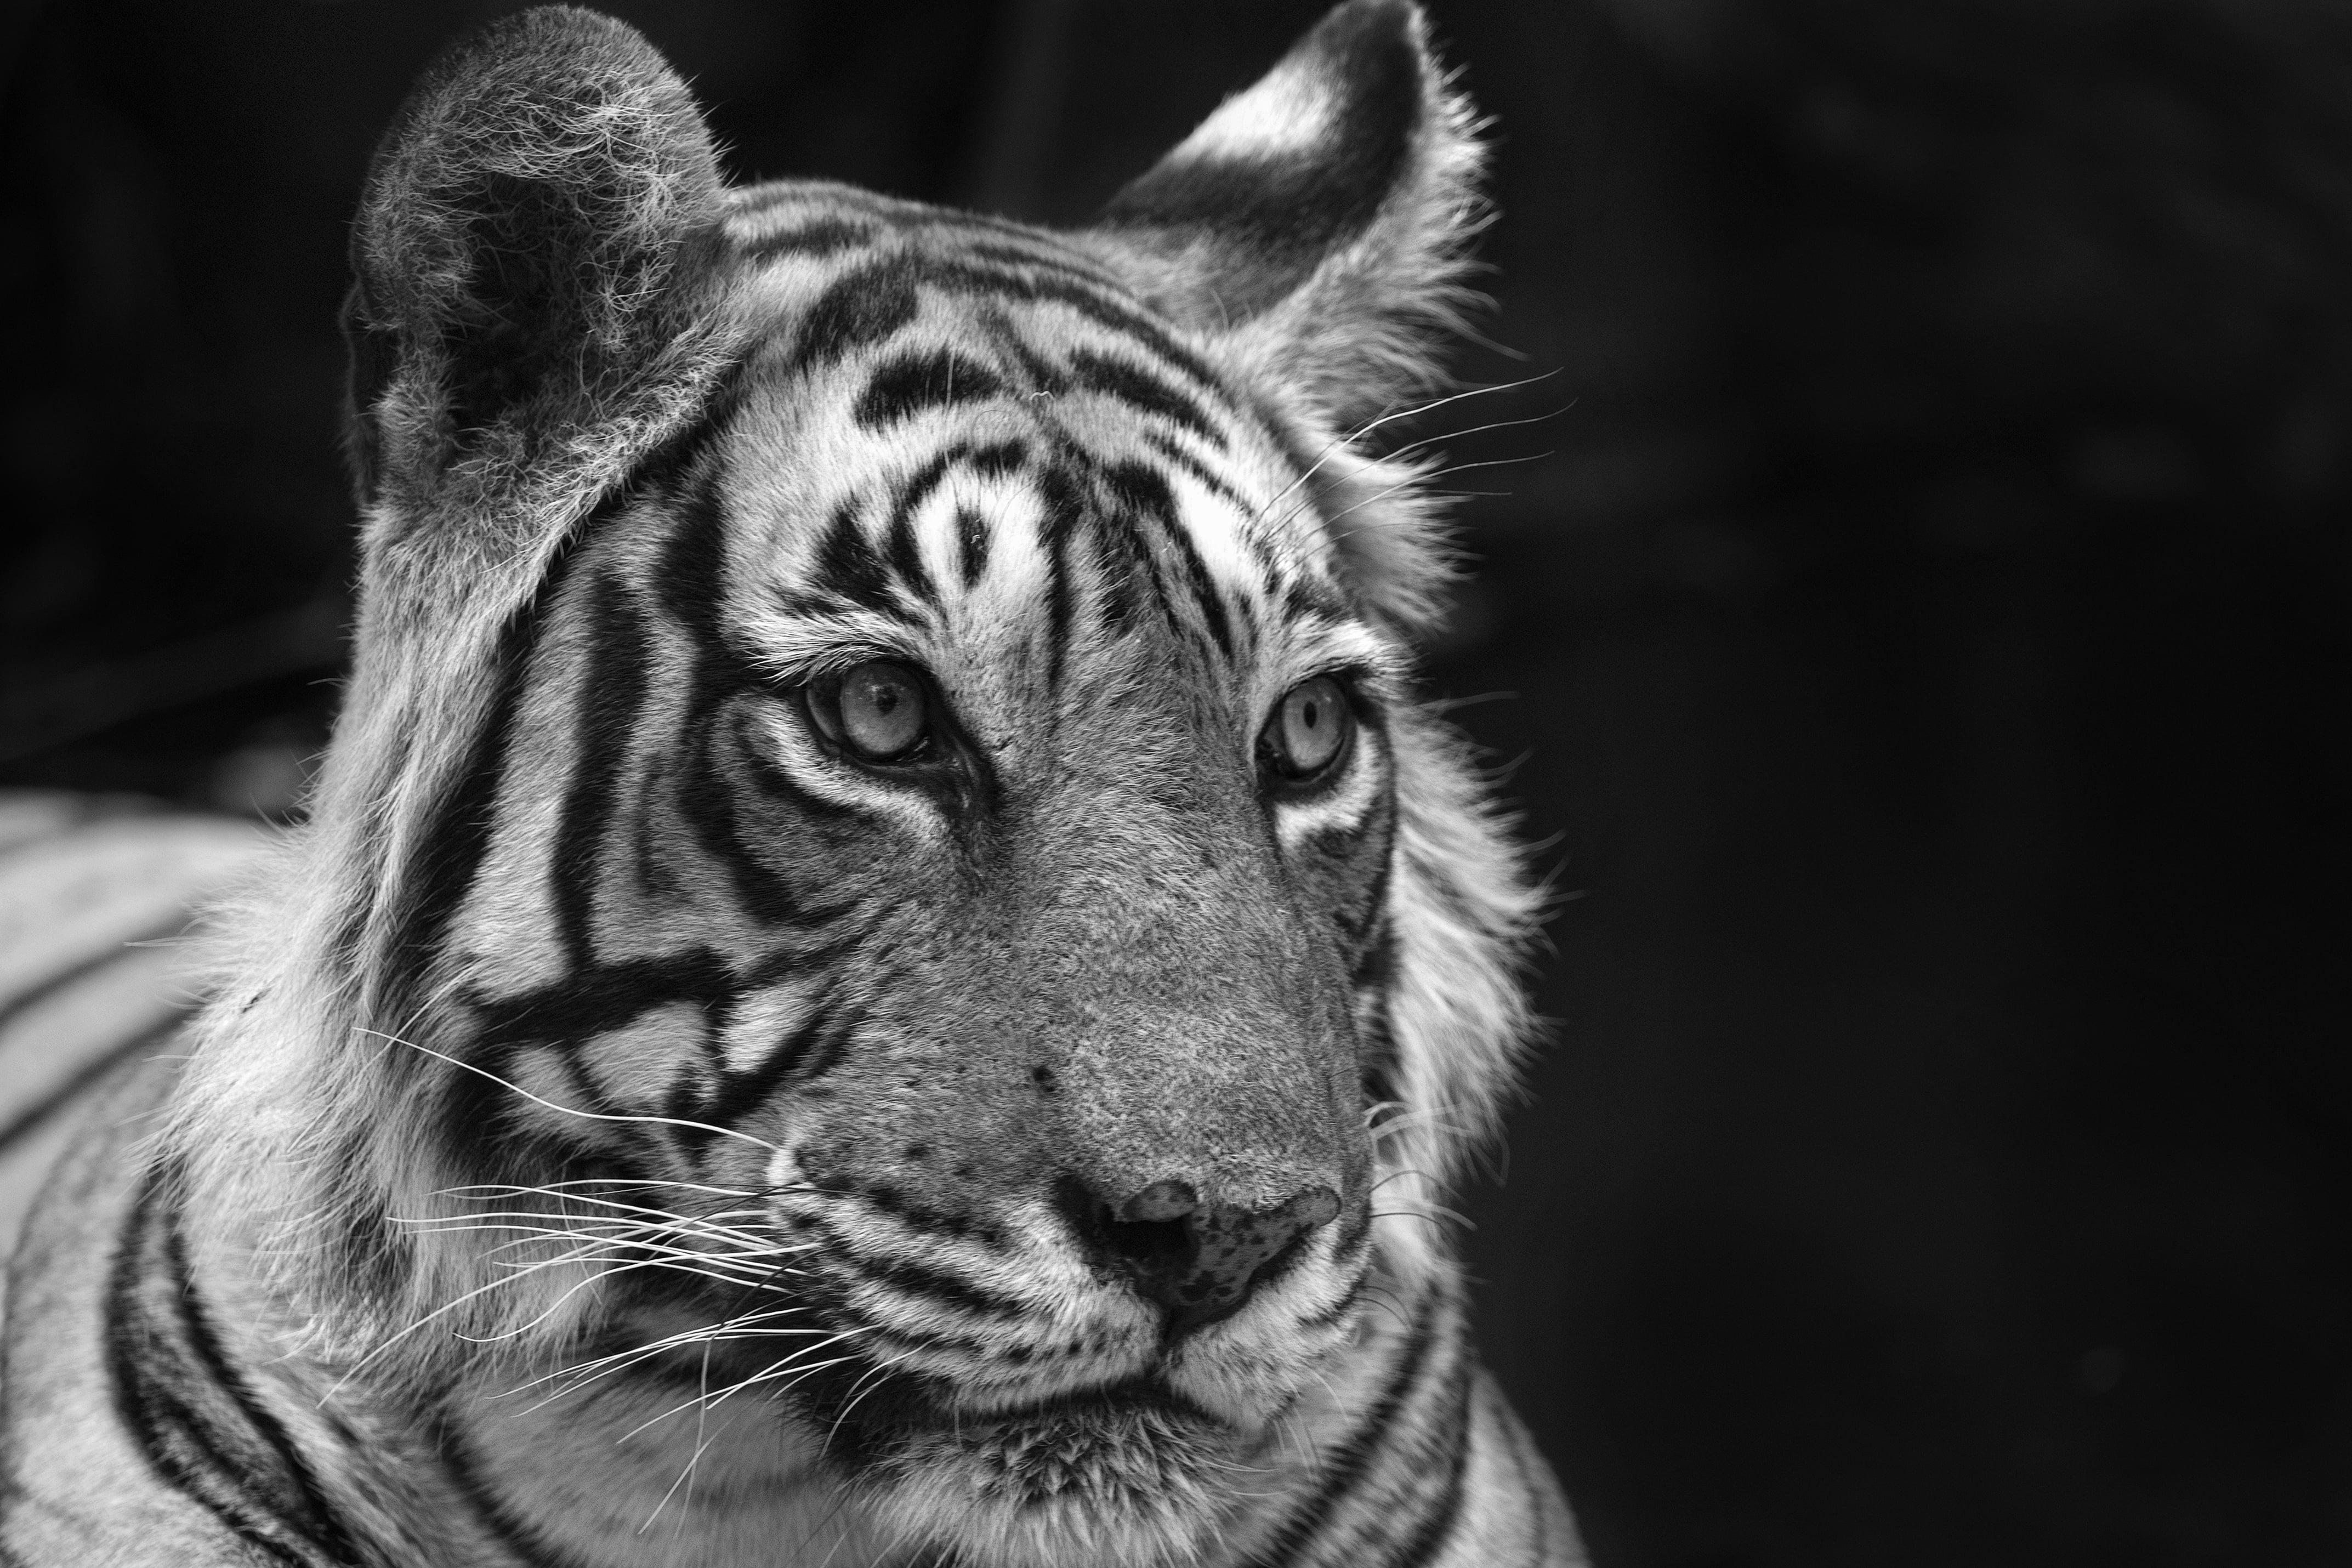 Aditya Dicky Singh Landscape Photograph - Landscape Nature Animal Photograph Large Black and White Tiger Water Lake India 